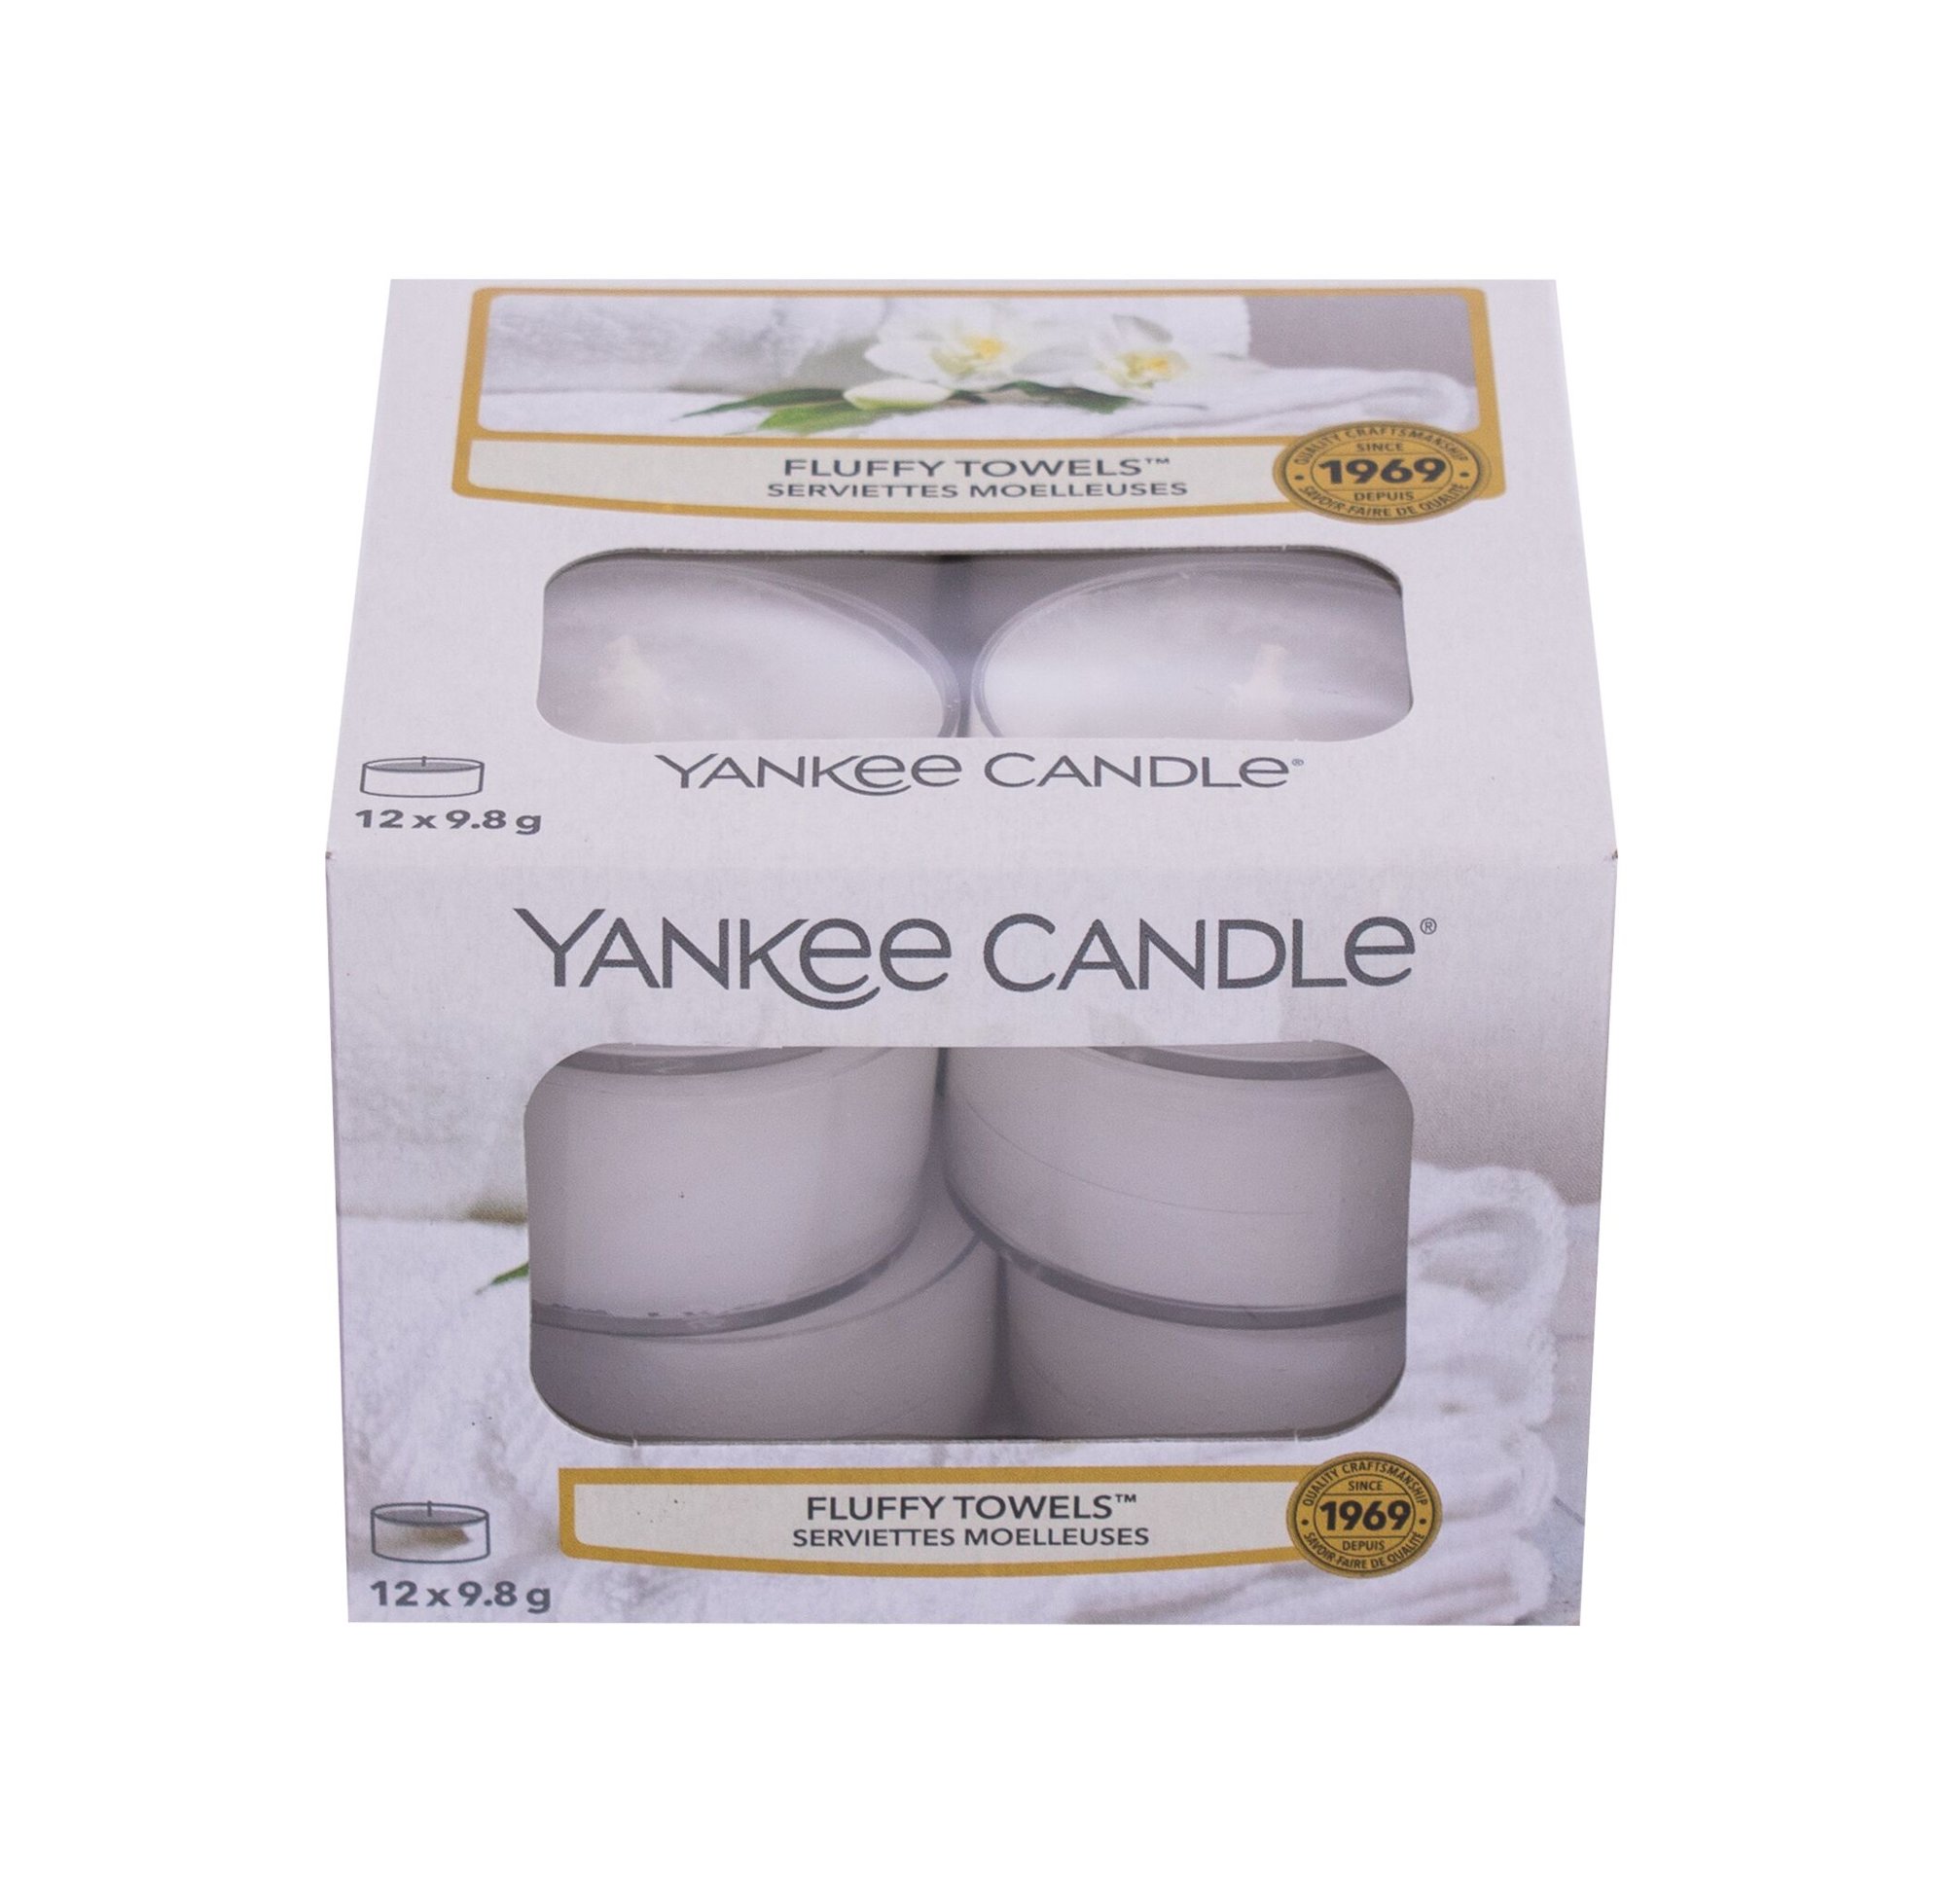 Yankee Candle Fluffy Towels 117,6g Kvepalai Unisex Scented Candle